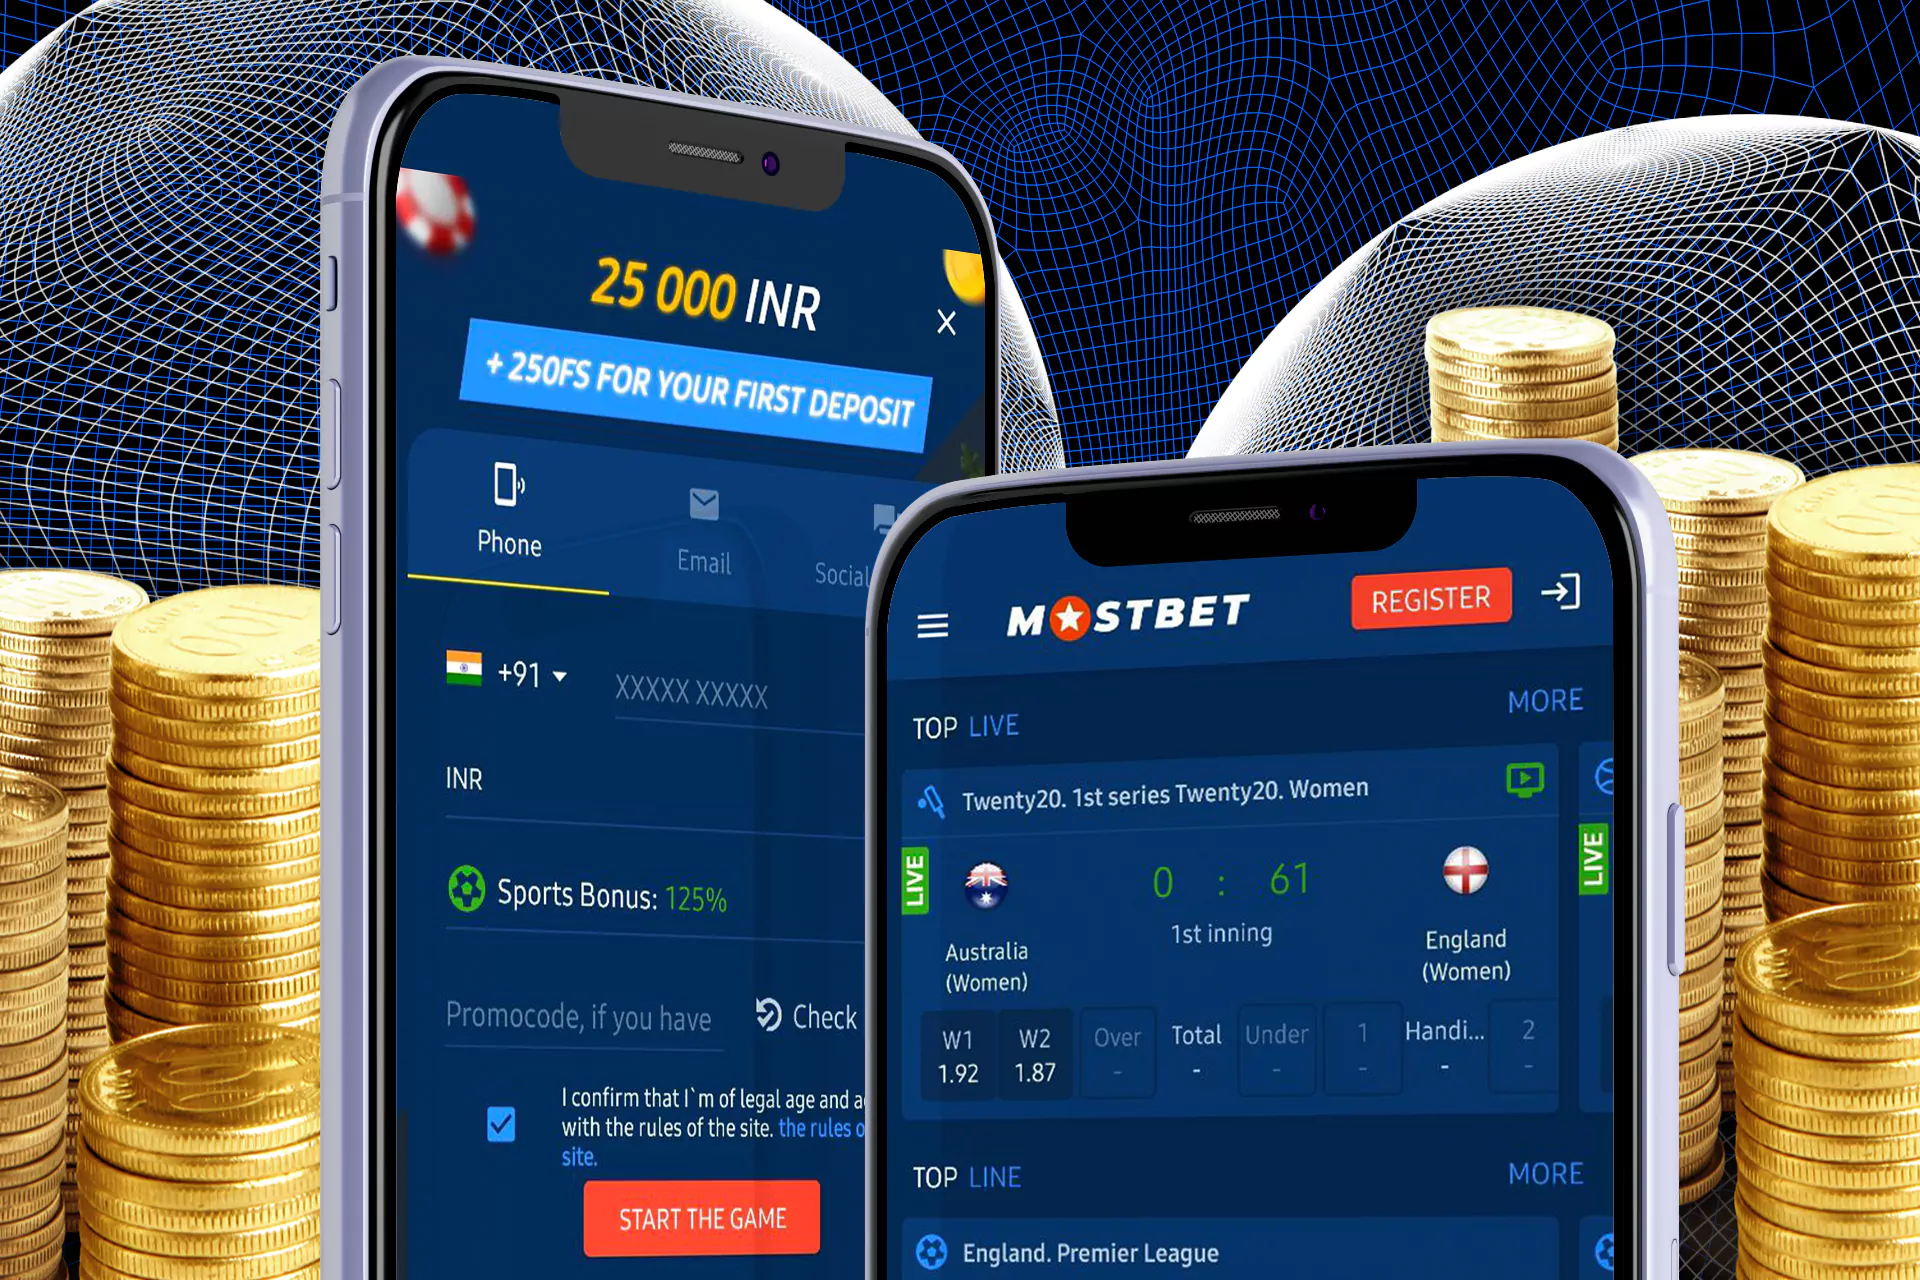 Mandatory conditions in order to start betting on Mostbet through the application, including registration.